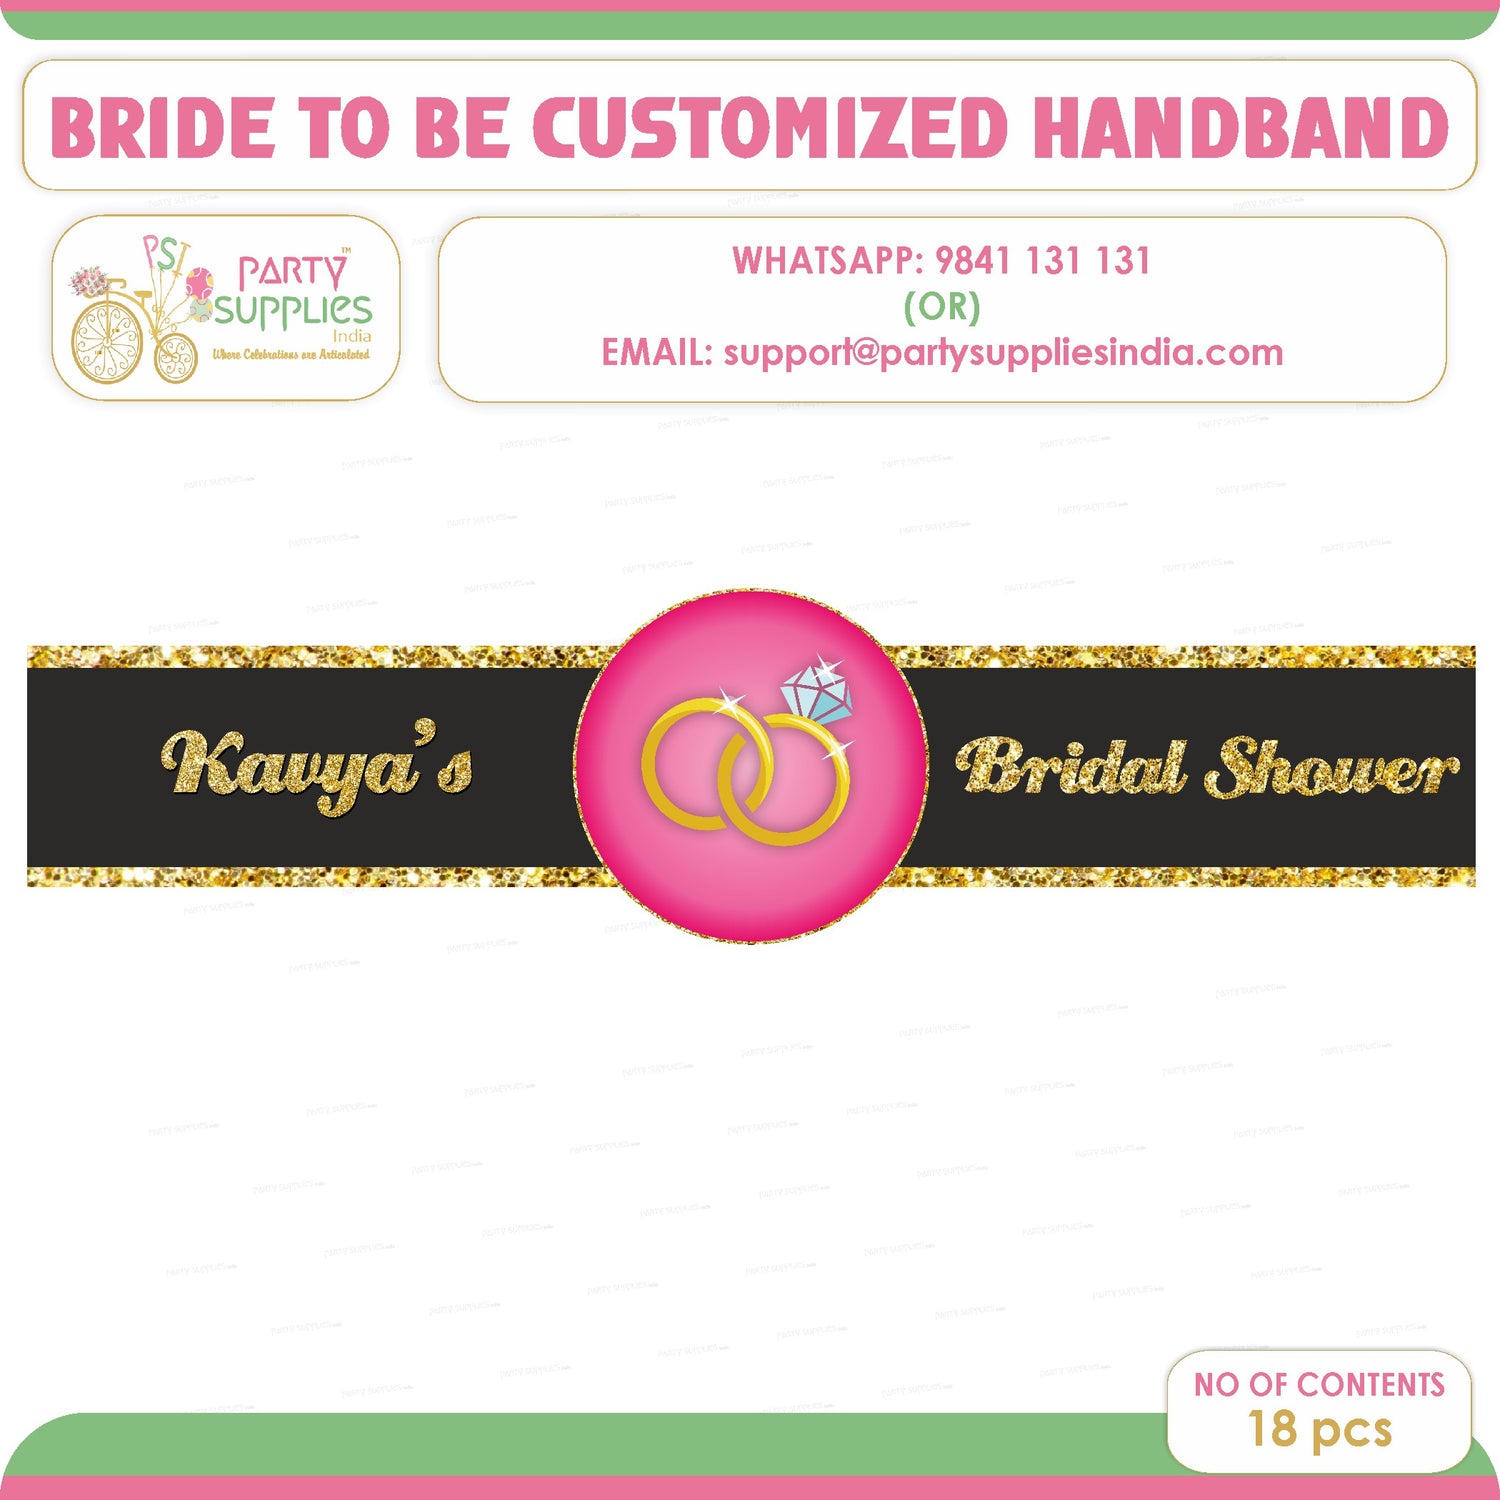 PSI  Bride to Be Theme  Hand Band